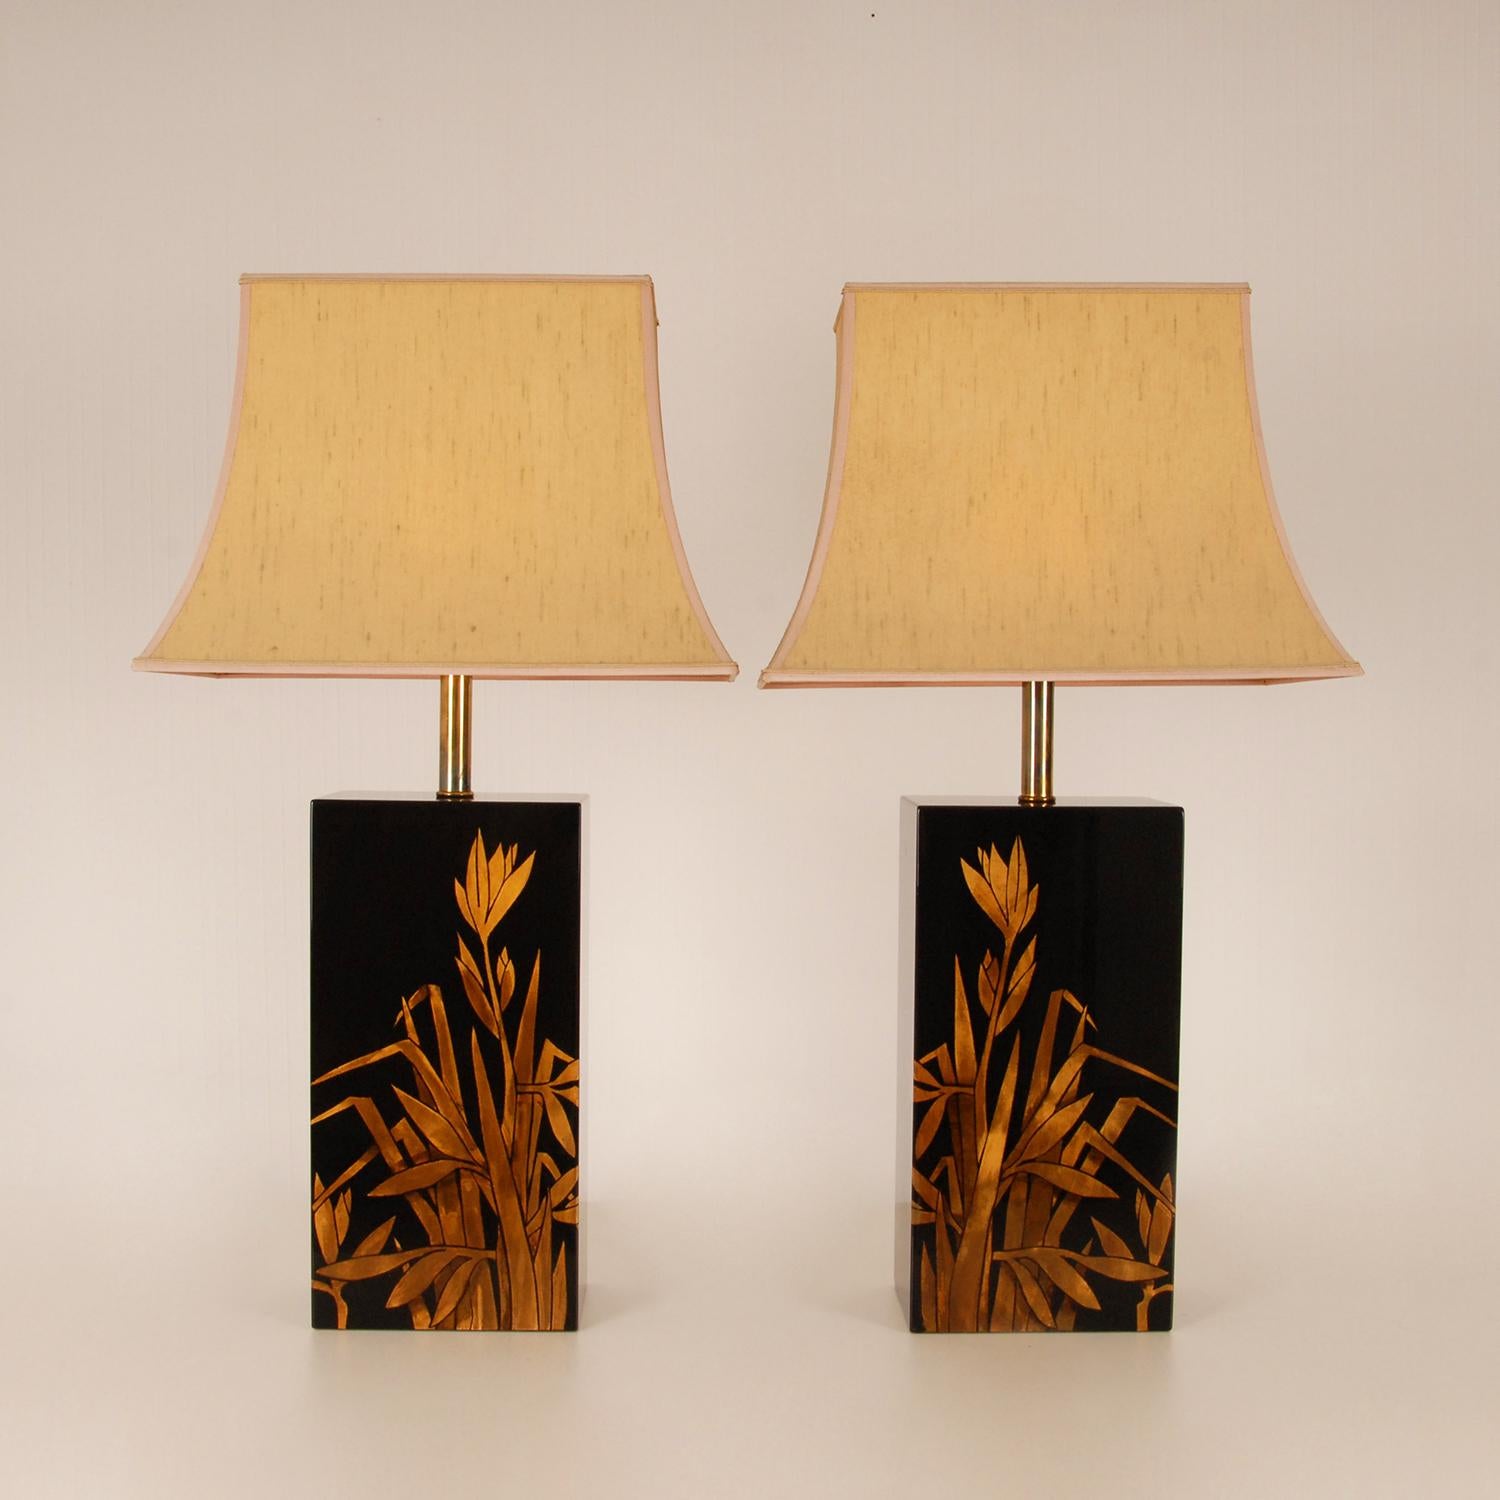 French Vintage Chinoiserie Gold and Black lacquer Pagoda Table Lamps Retro 1970s a Pair